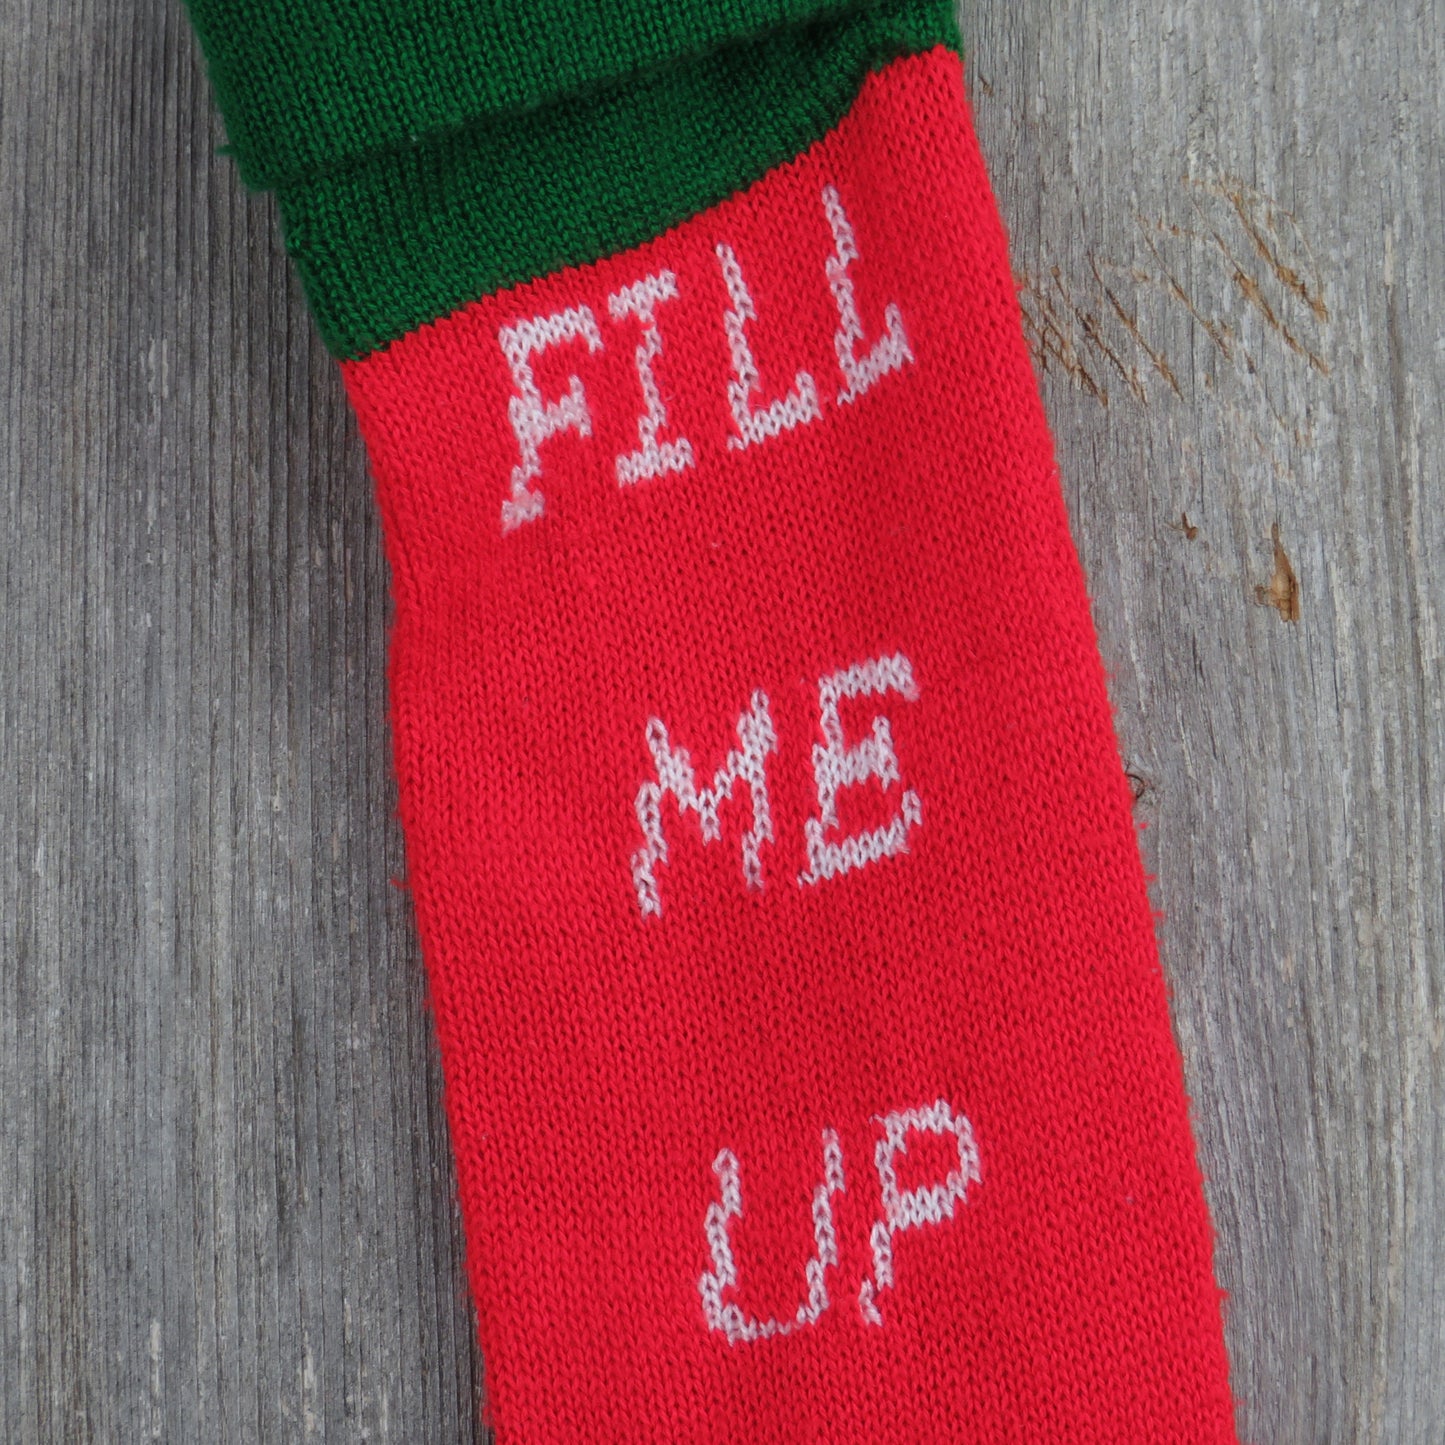 Vintage Knit Christmas Stocking Fill Me Up To The Top Please Red White Green - At Grandma's Table